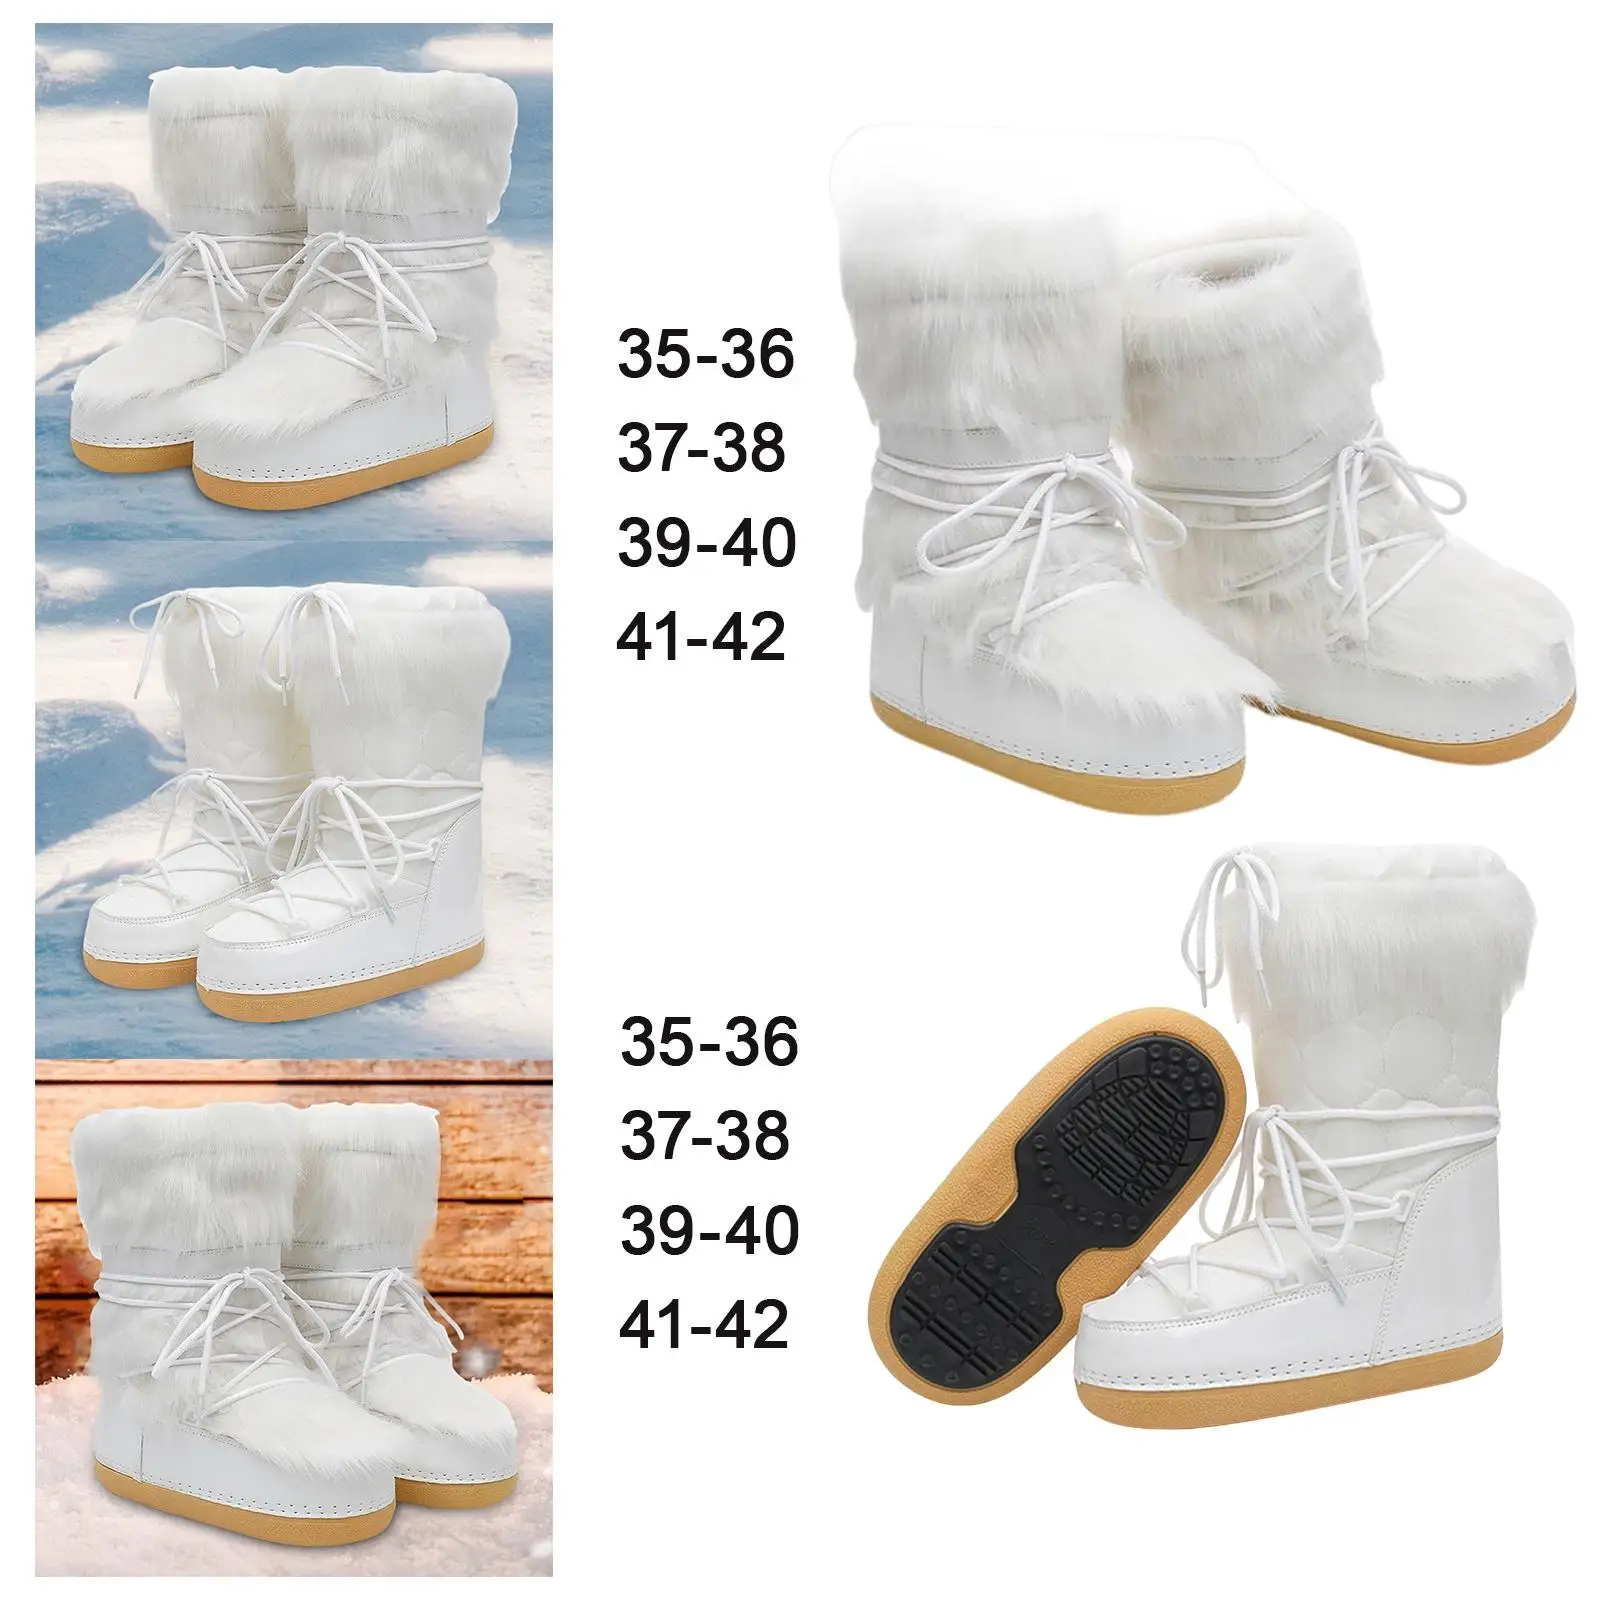 Women`s Snow Boots White Ski Boots Mid Calf Booties Lace up Water Resistant Long Boots Comfortable for Outdoor Trail Work Ladies